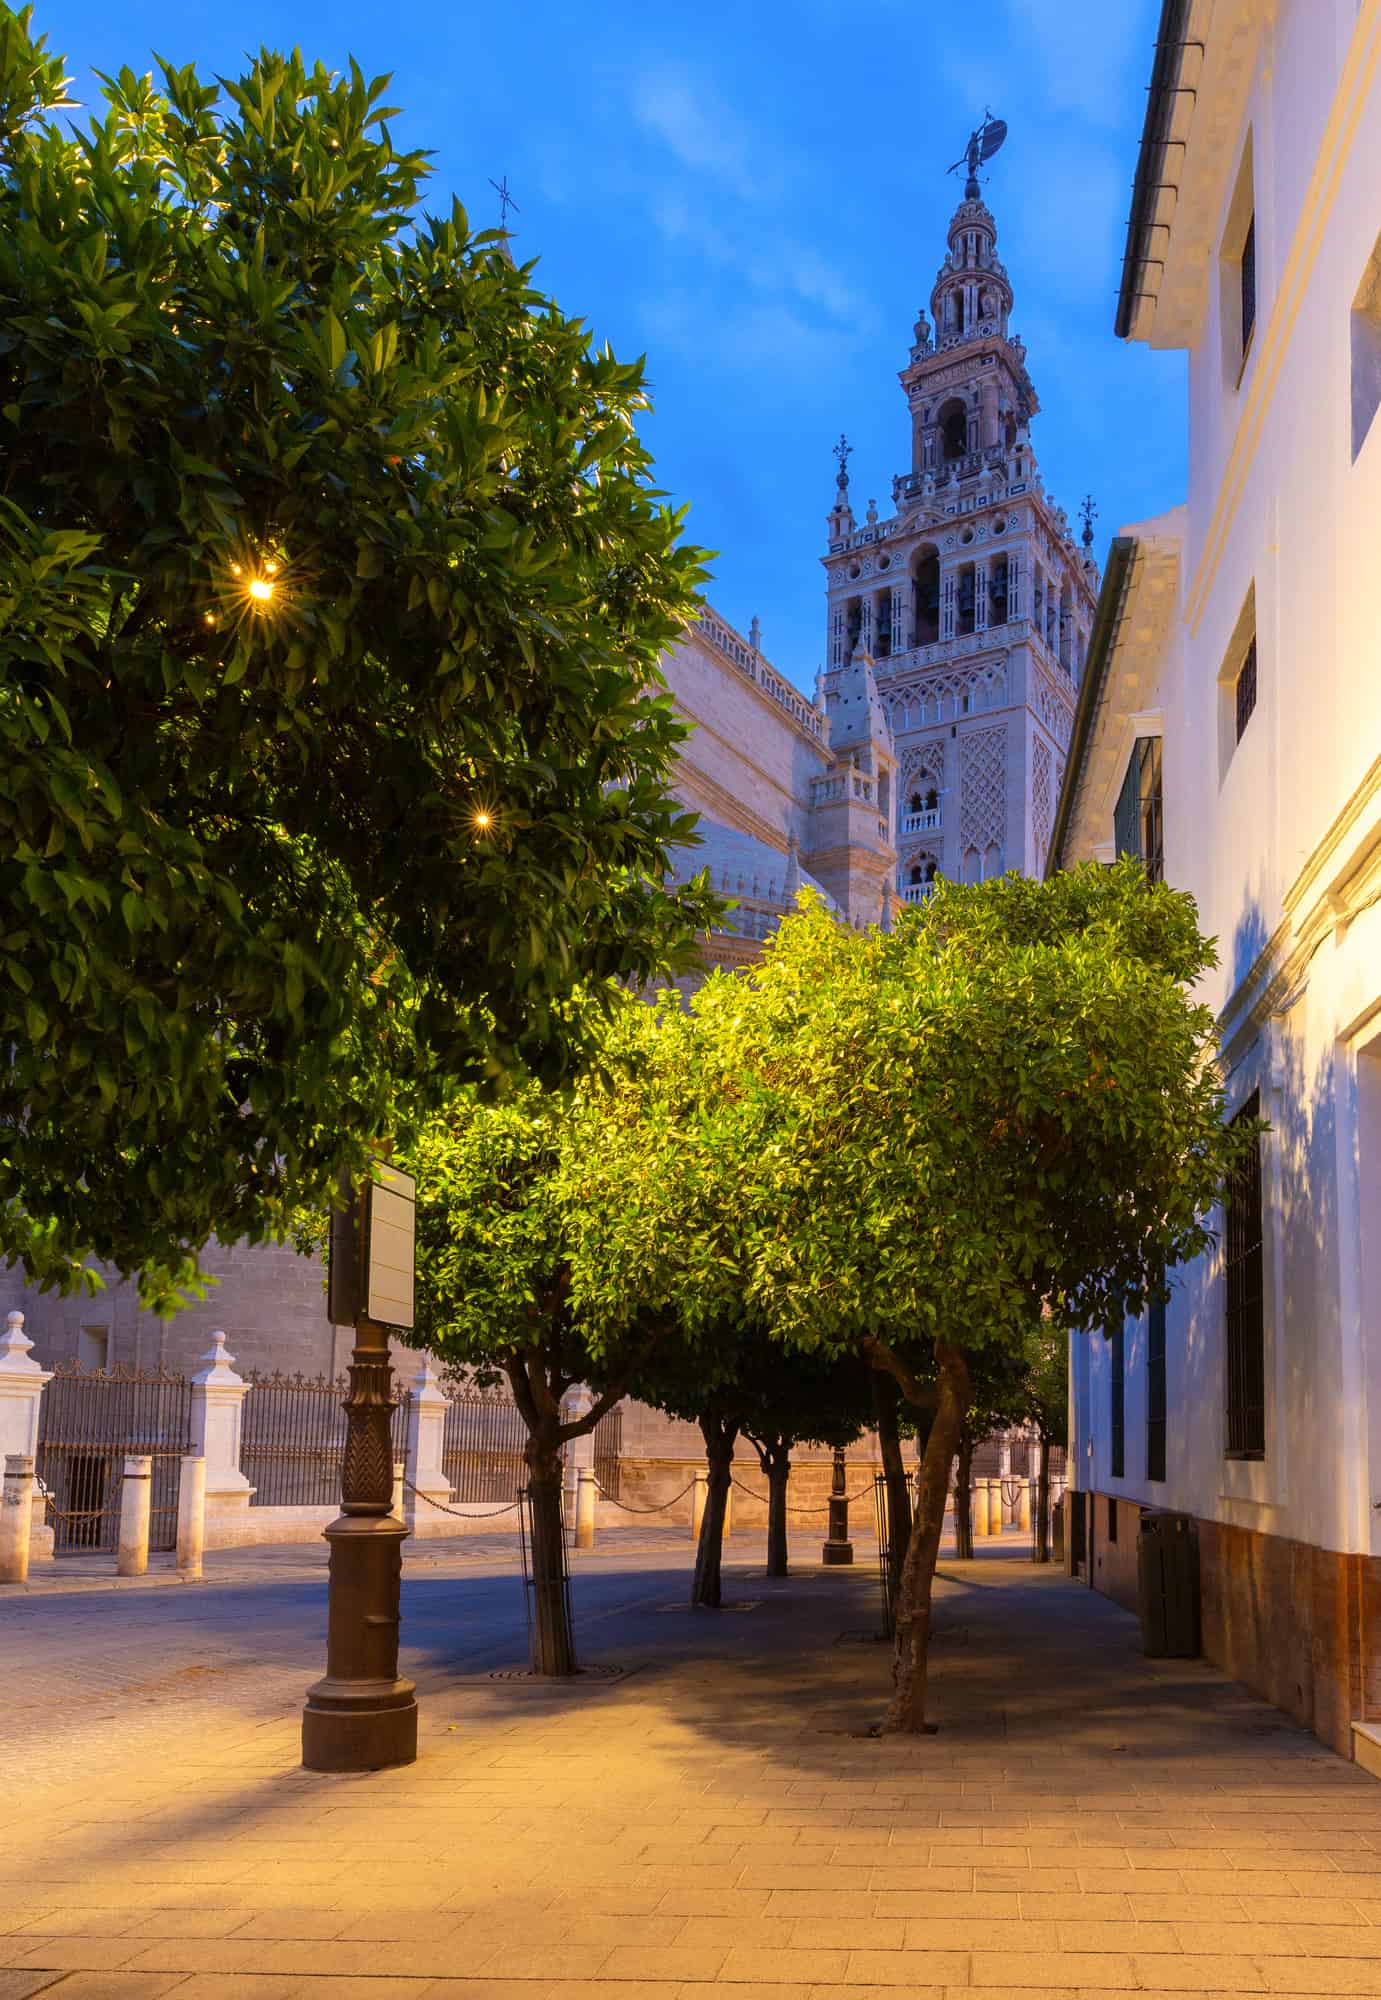 Seville. Giralda tower of the cathedral at dawn.